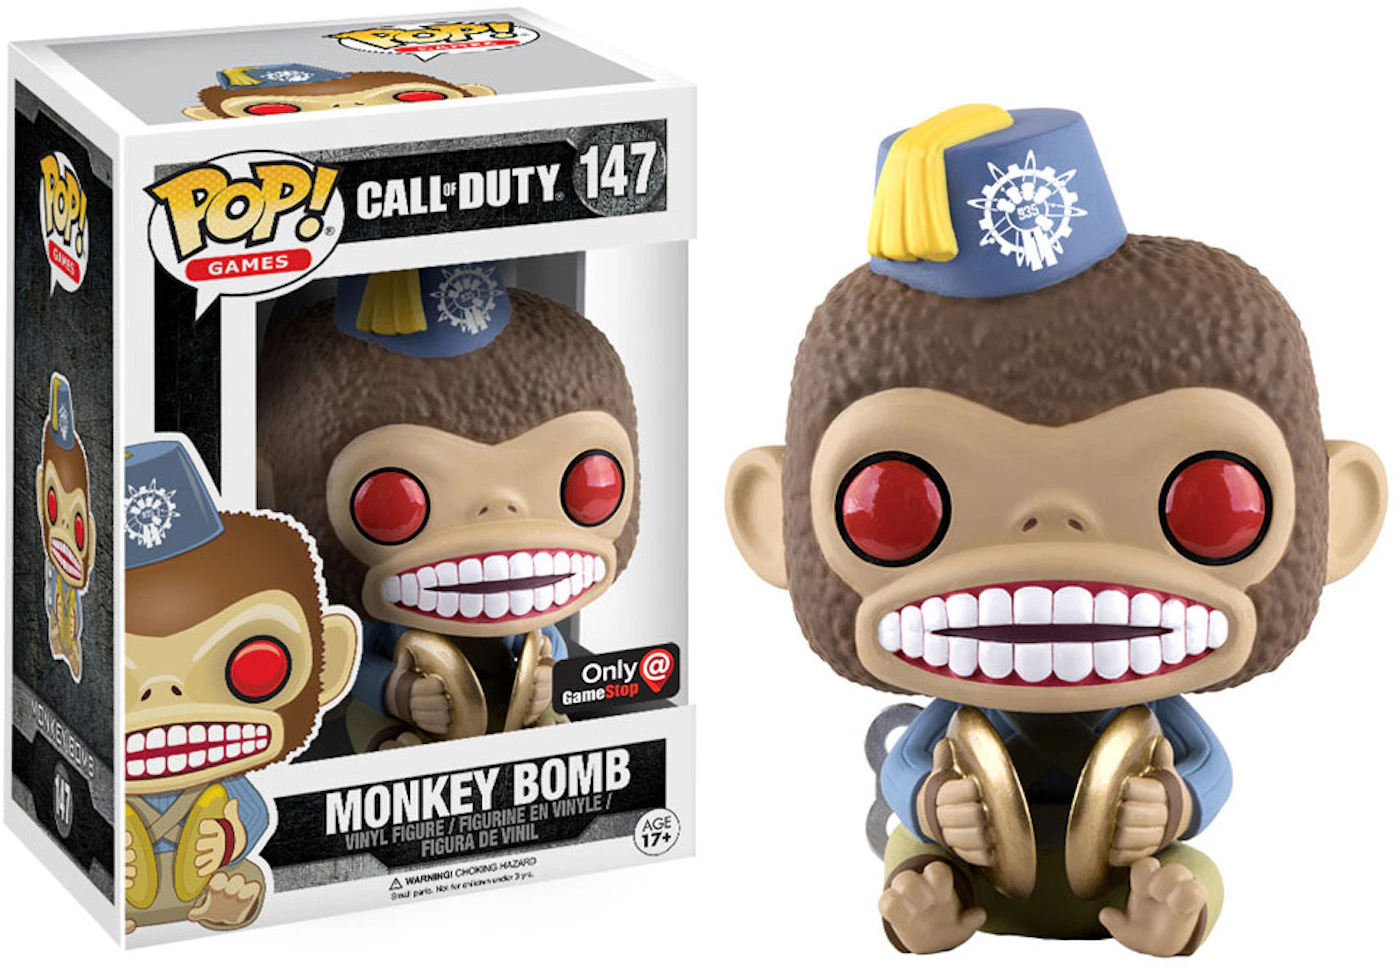 Funko POP - Call of Duty - Monkey Bomb 147 Sticker Only at GameStop